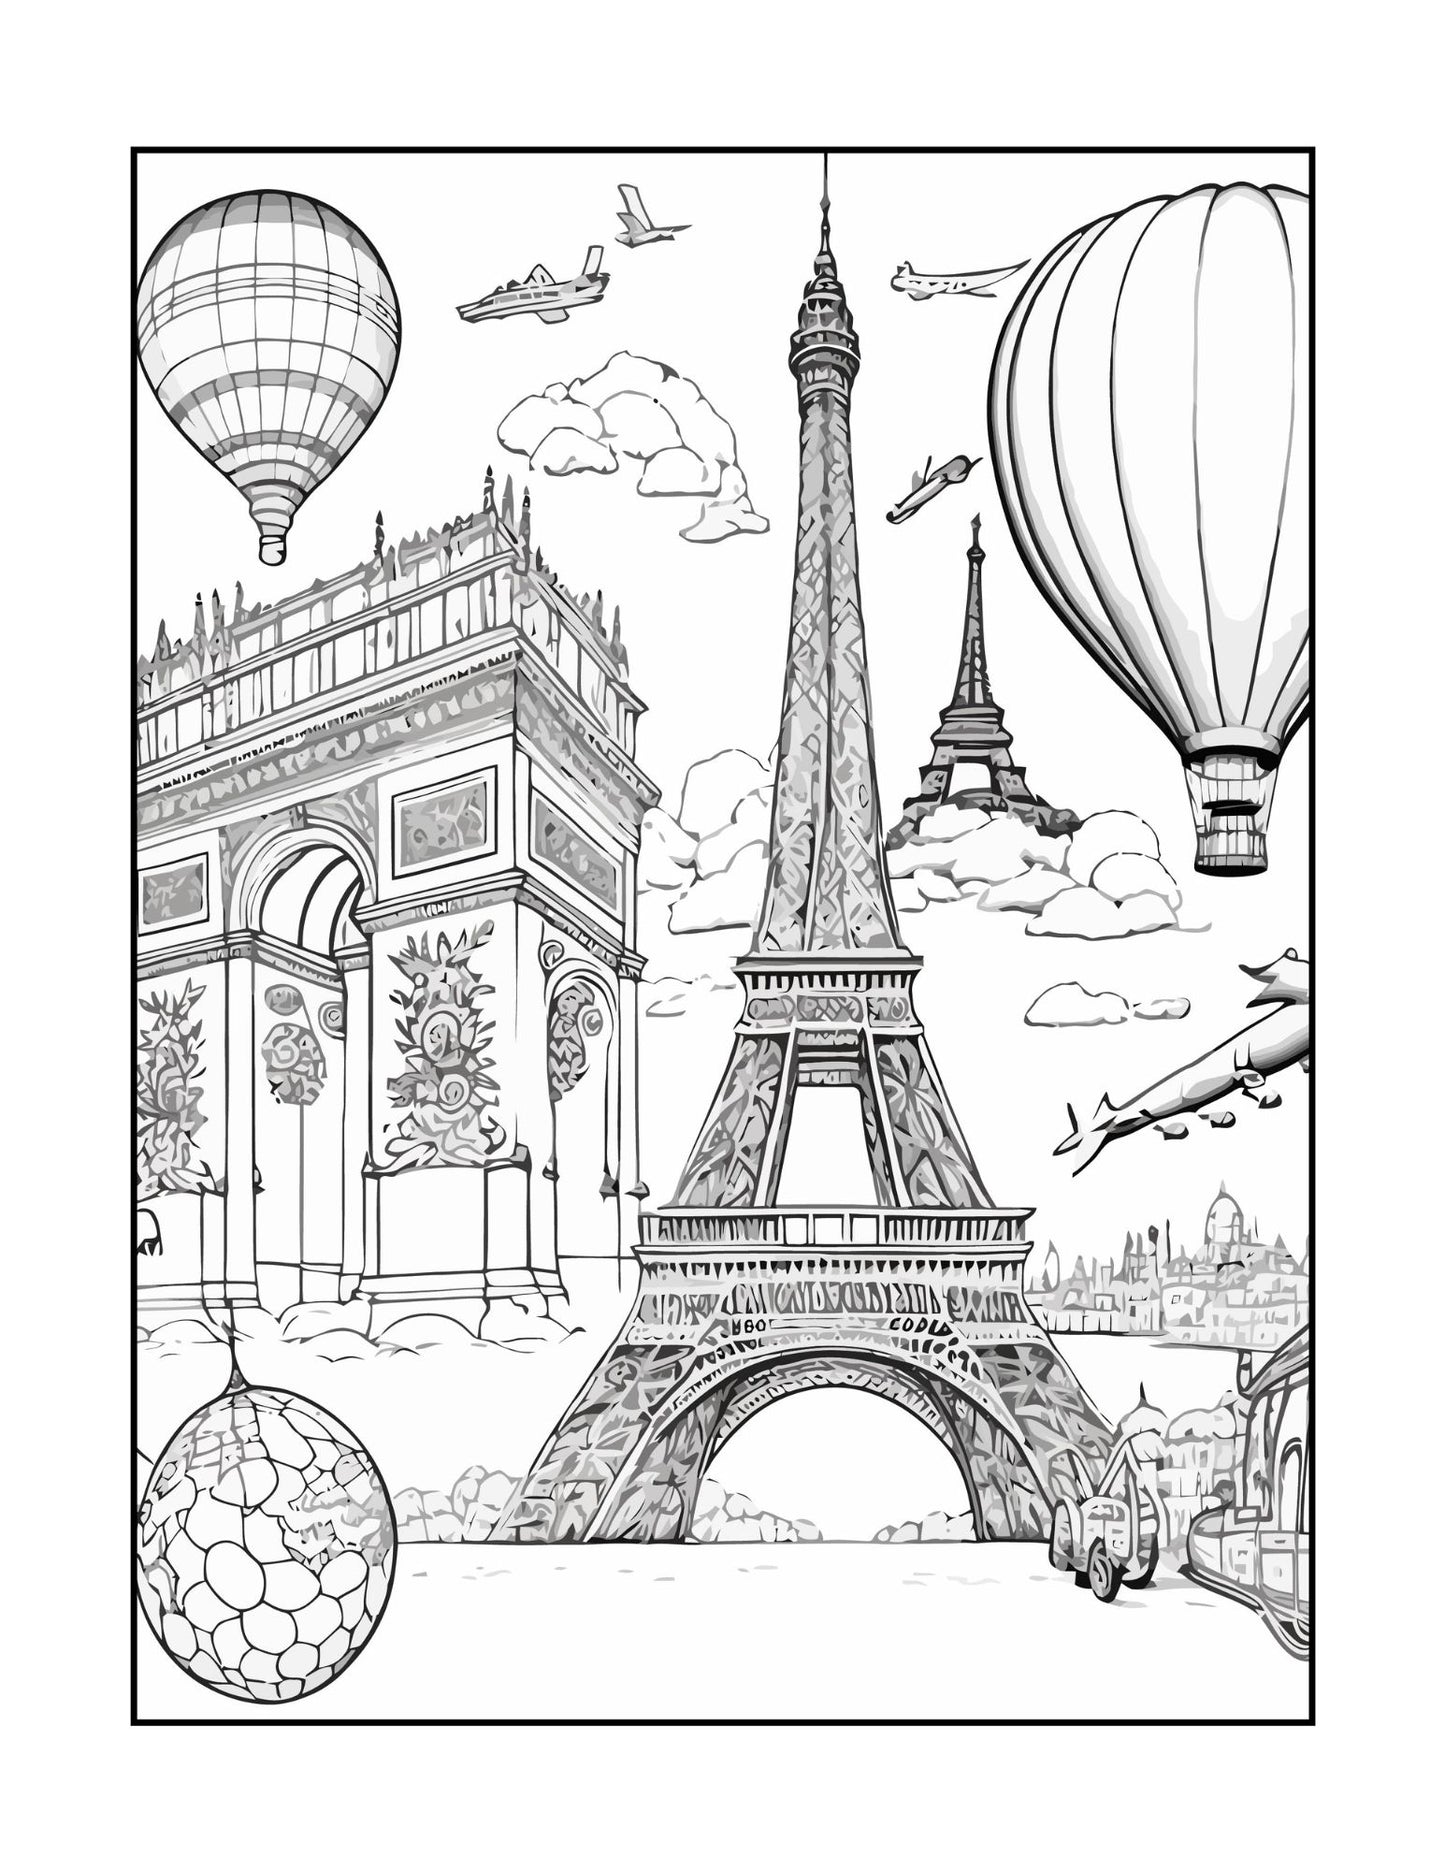 Travel Coloring Book For Adults Coloring Pages Travel Coloring Book For Women Men Coloring Books For Adults Relaxation Gift Coloring Books